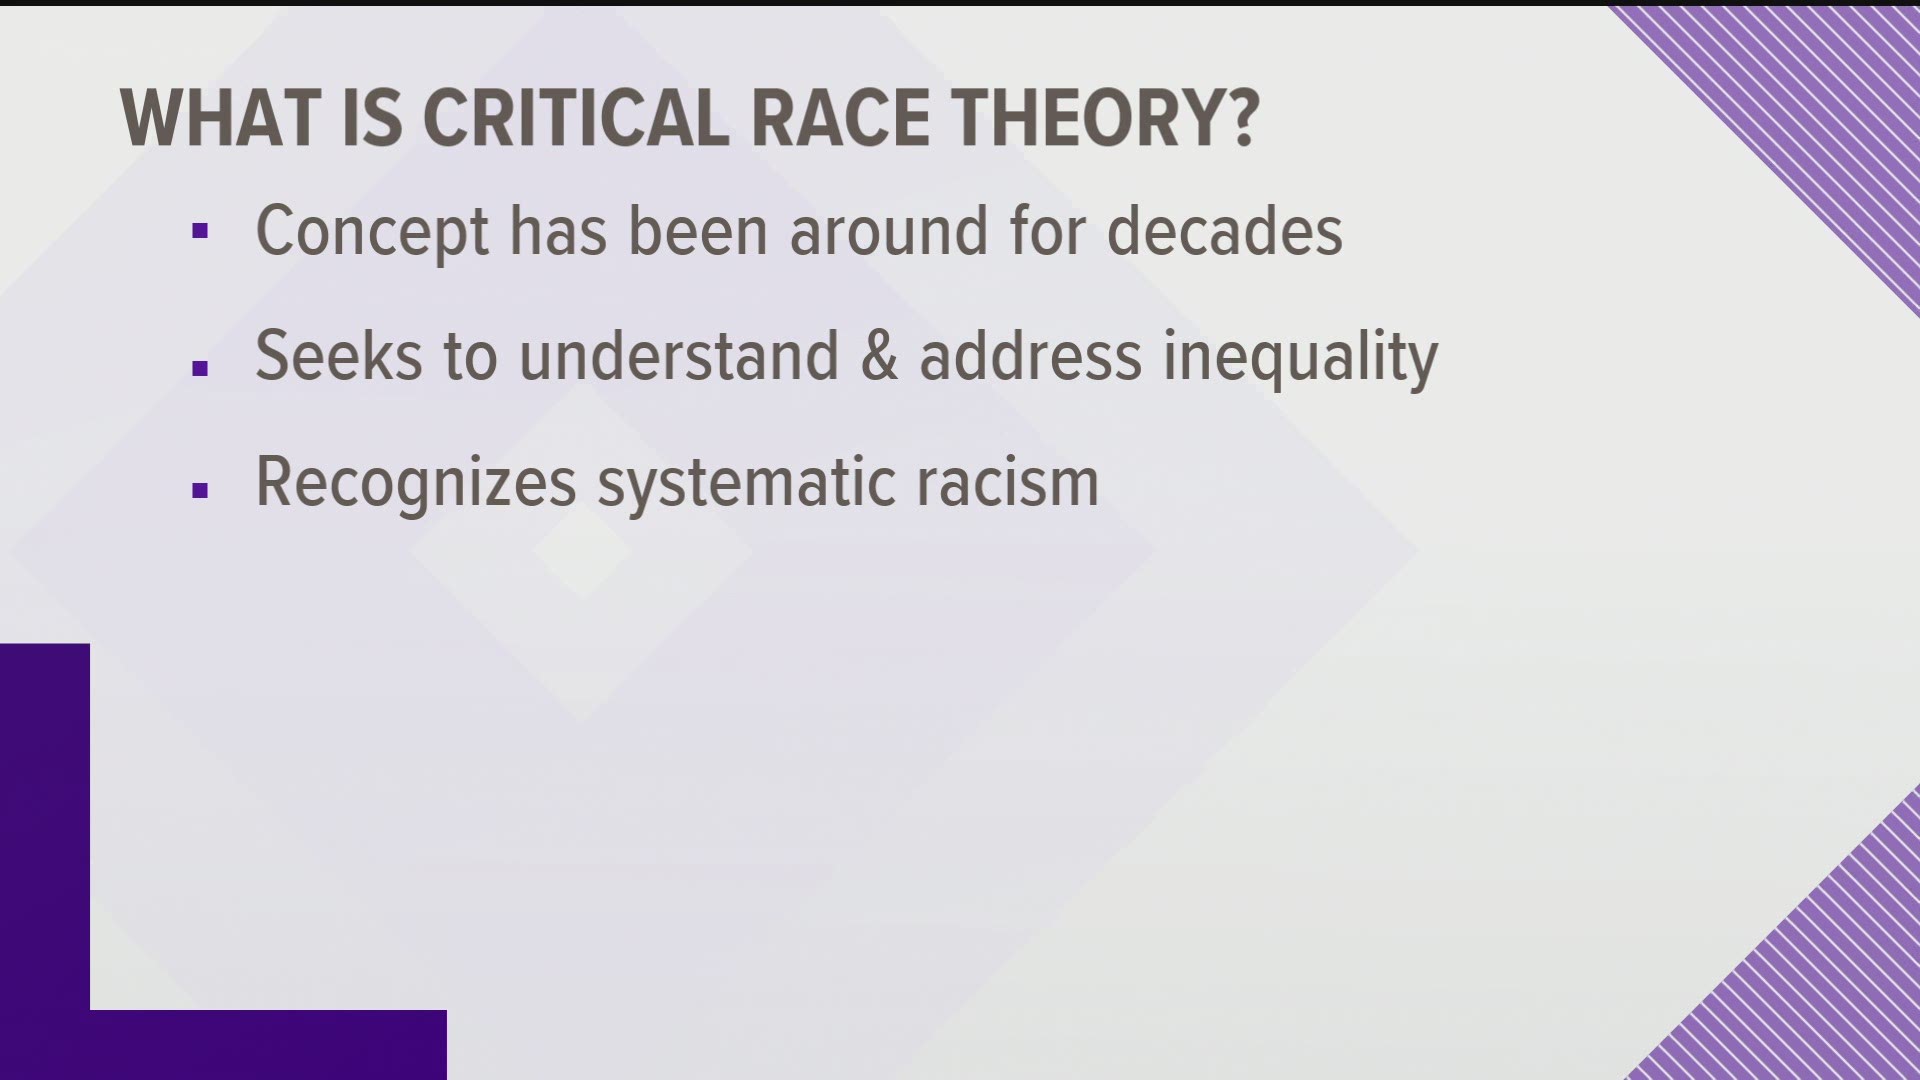 The concept recognizes systemic racism.